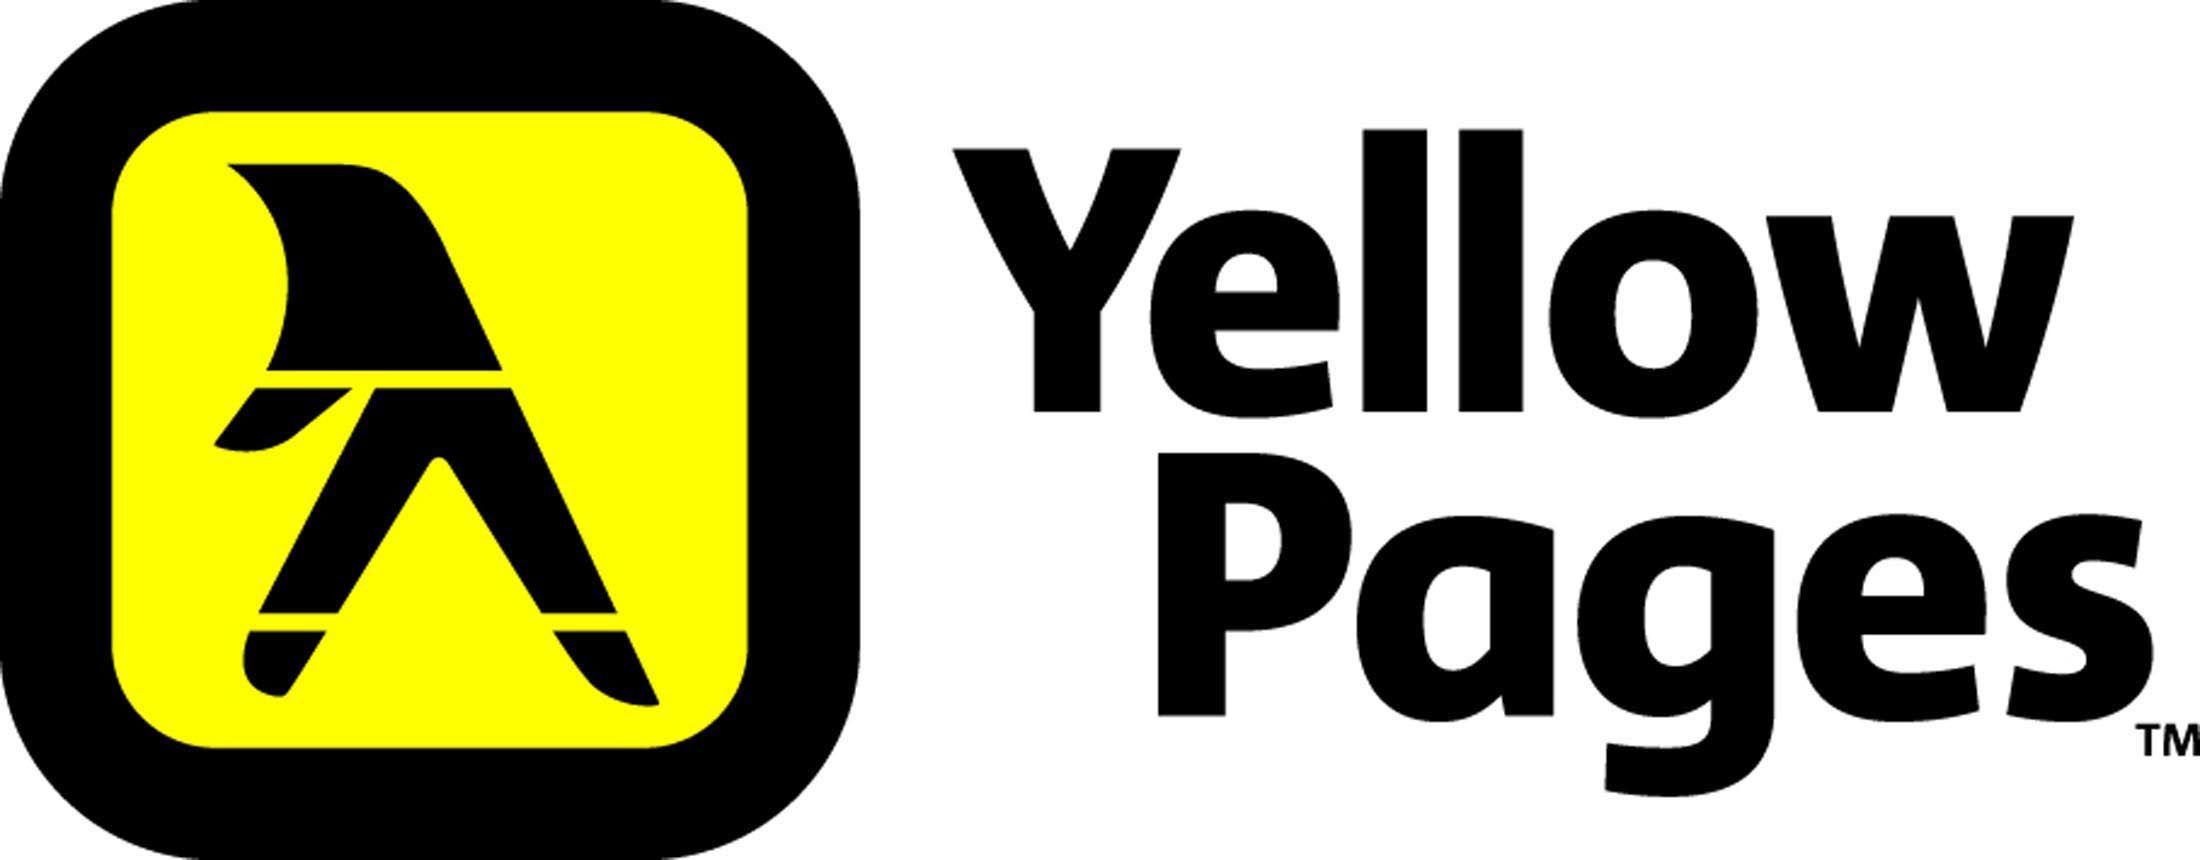 YP Yellow Pages New Logo - 1. Visit yellowpages.com or yp.com 2. Search “PT Plus” and enter the ...